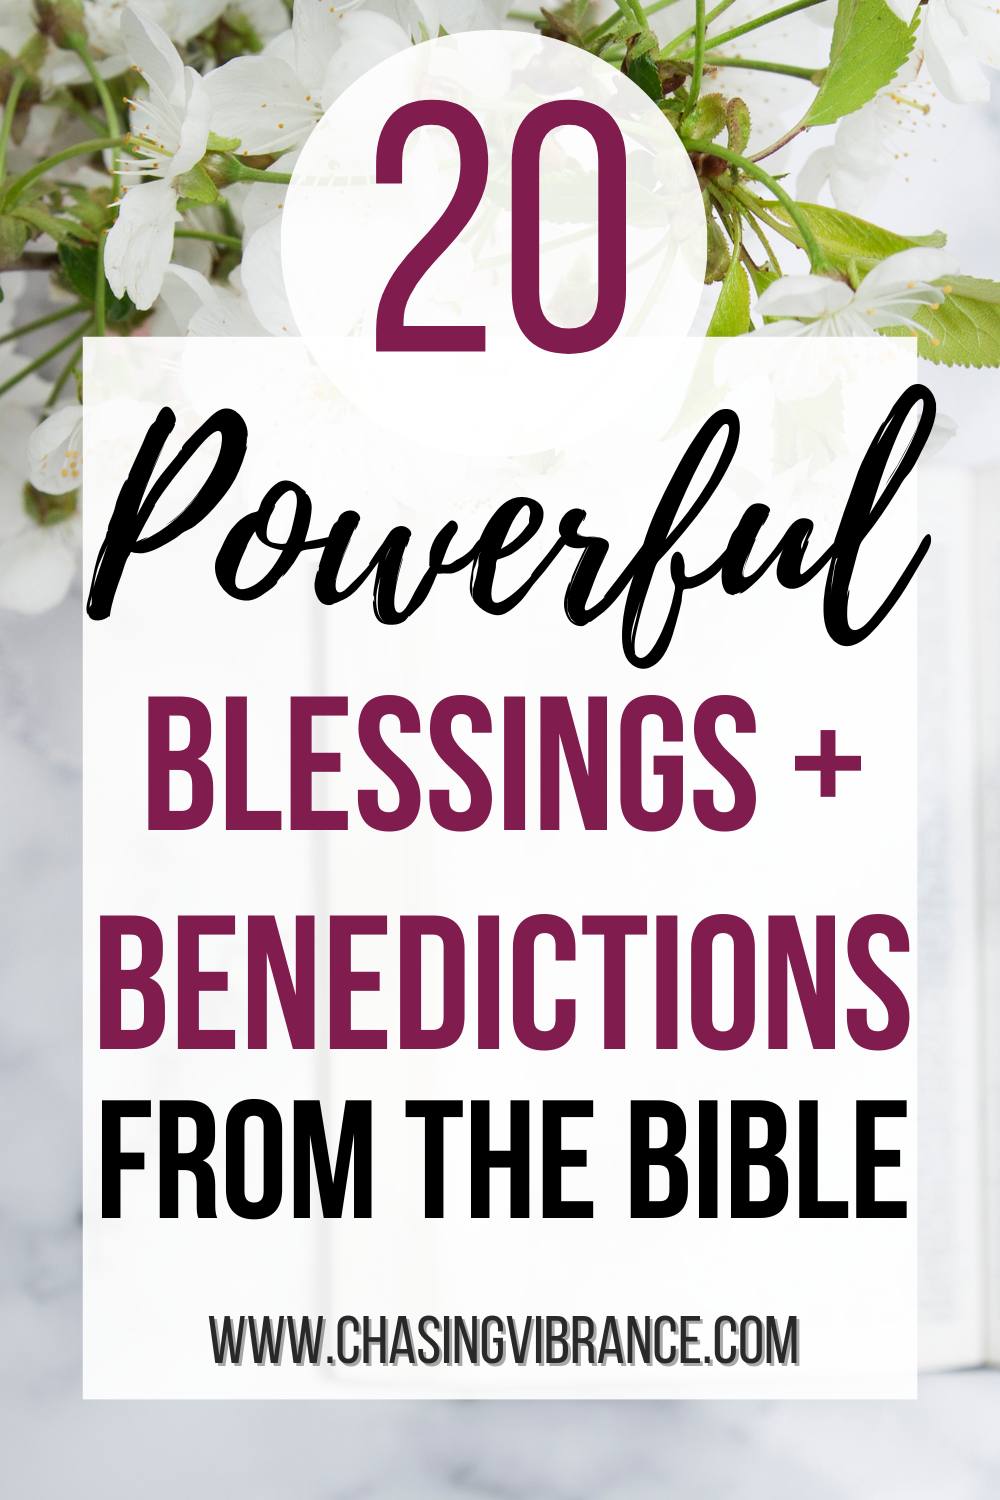 20 Powerful Blessings and Benedictions in the Bible